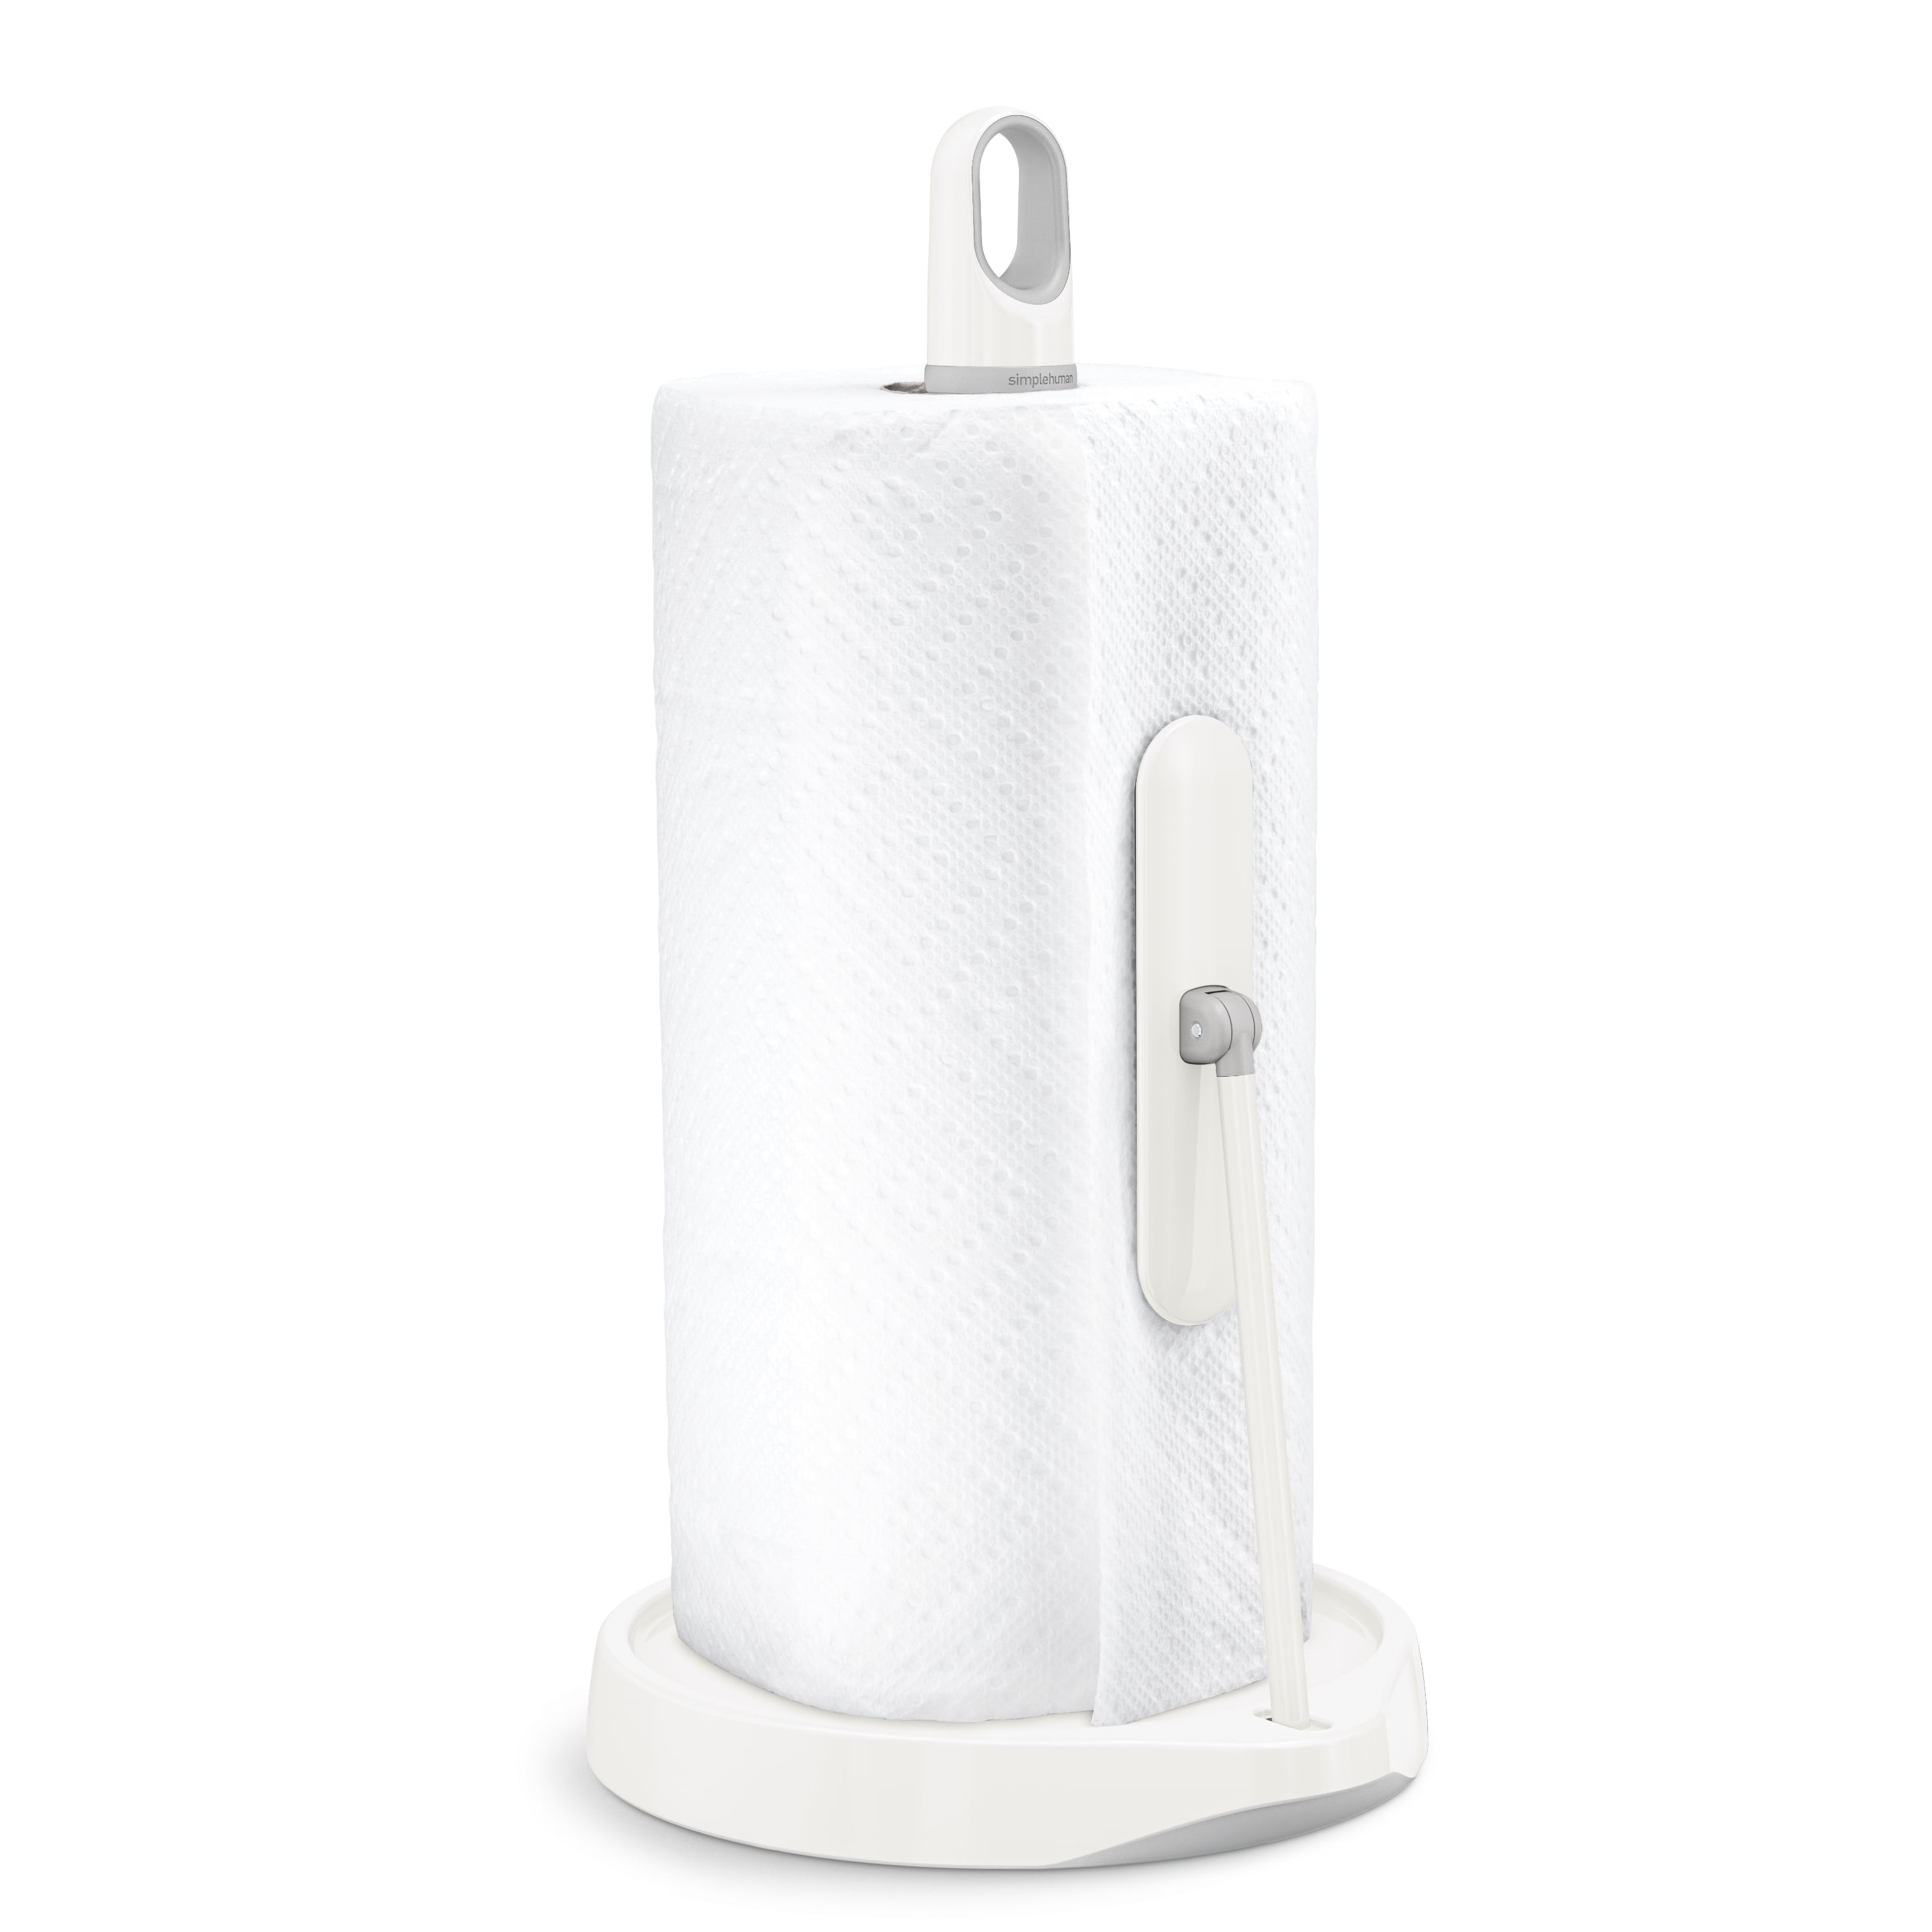 Simplehuman Wall Mount Paper Towel Holder Brushed Stainless Steel : Target